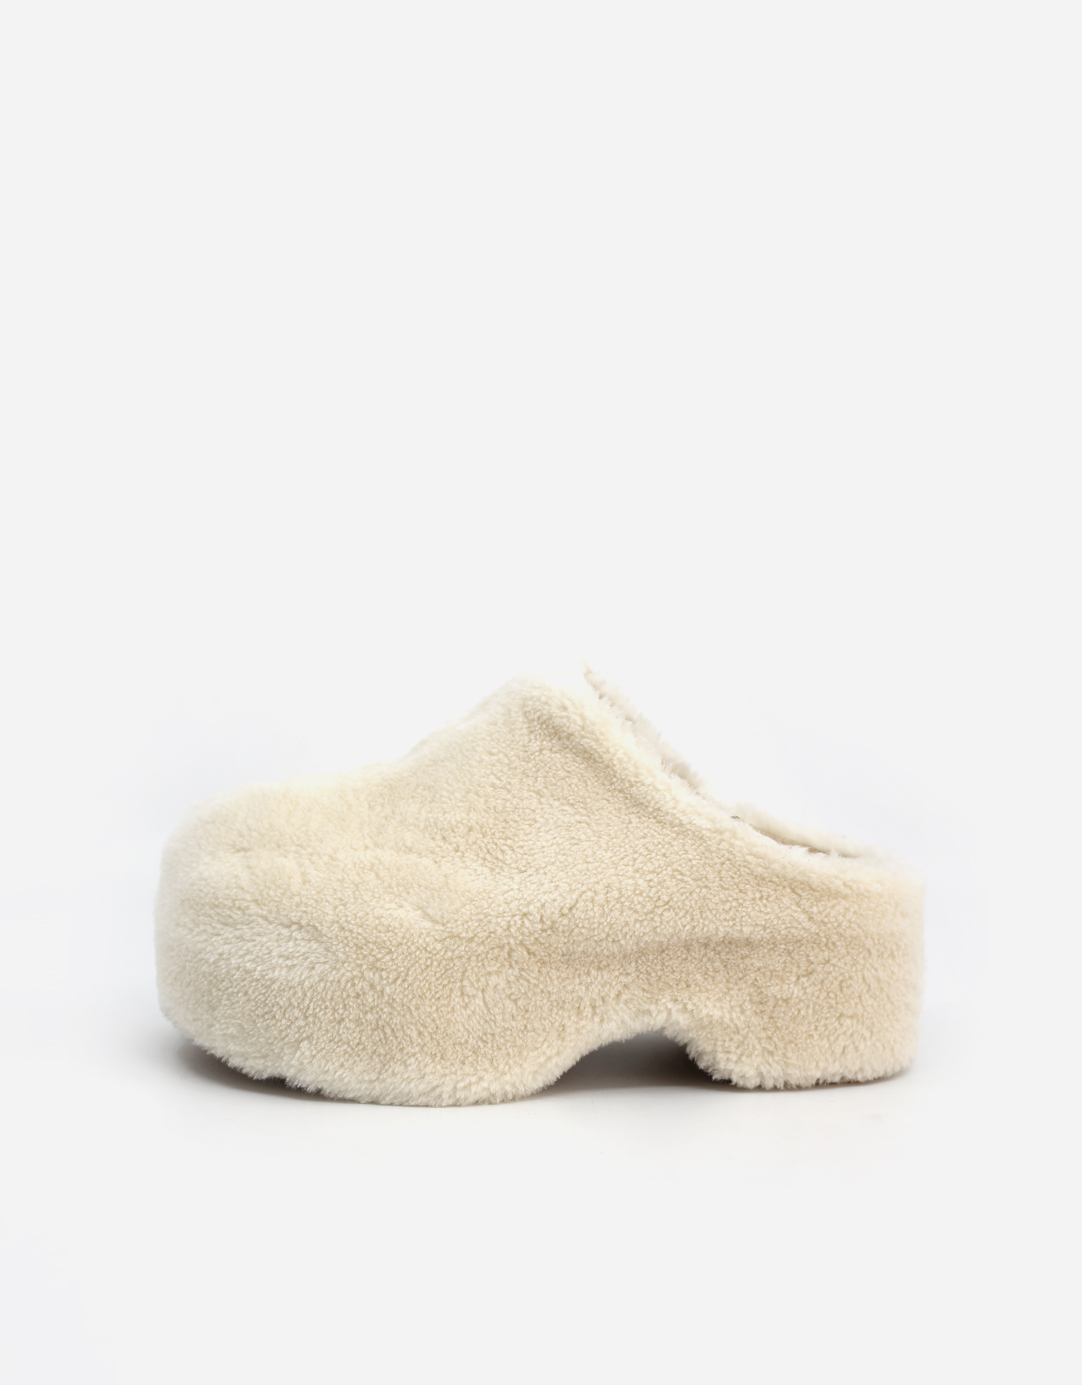 IVORY WINTER WOOL BLOAFER